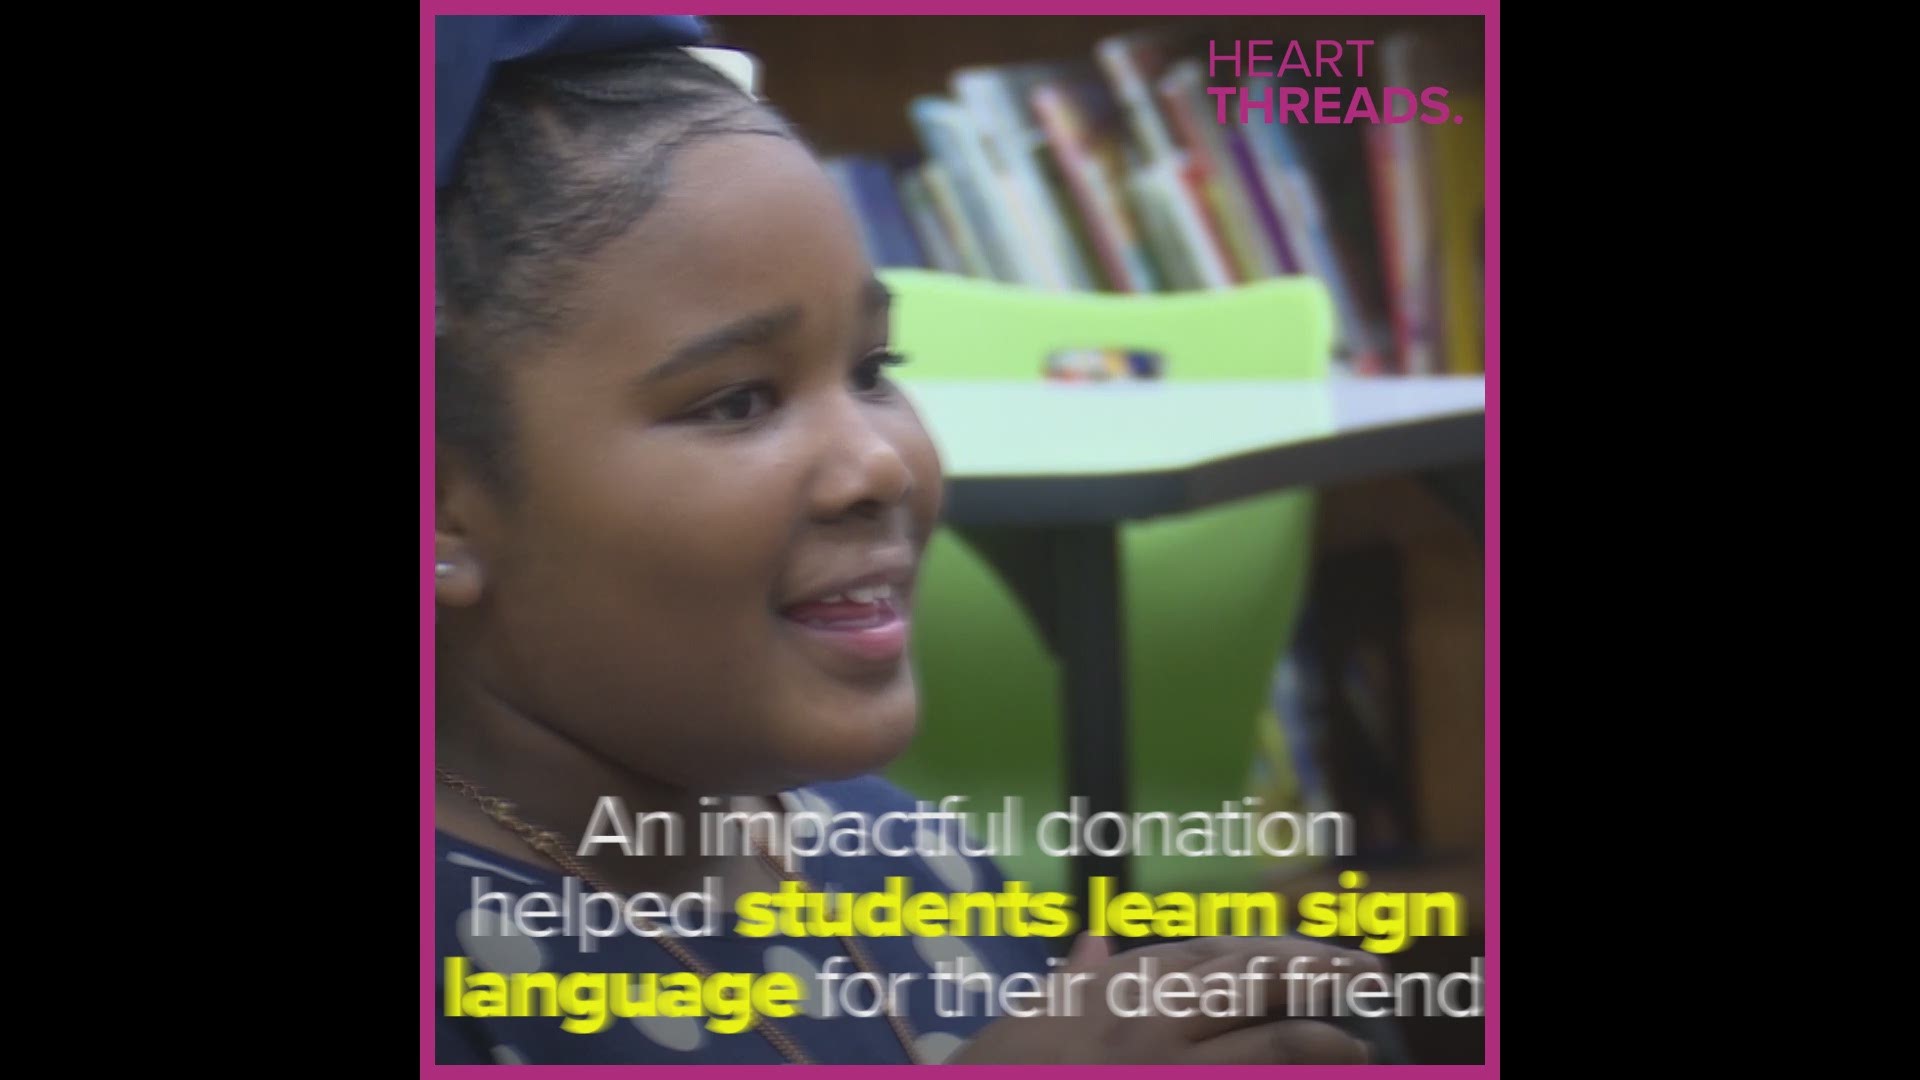 Serenity, who is deaf, had difficulty communicating with her classmates. But that's changed, now that her classmates have learned some sign language.